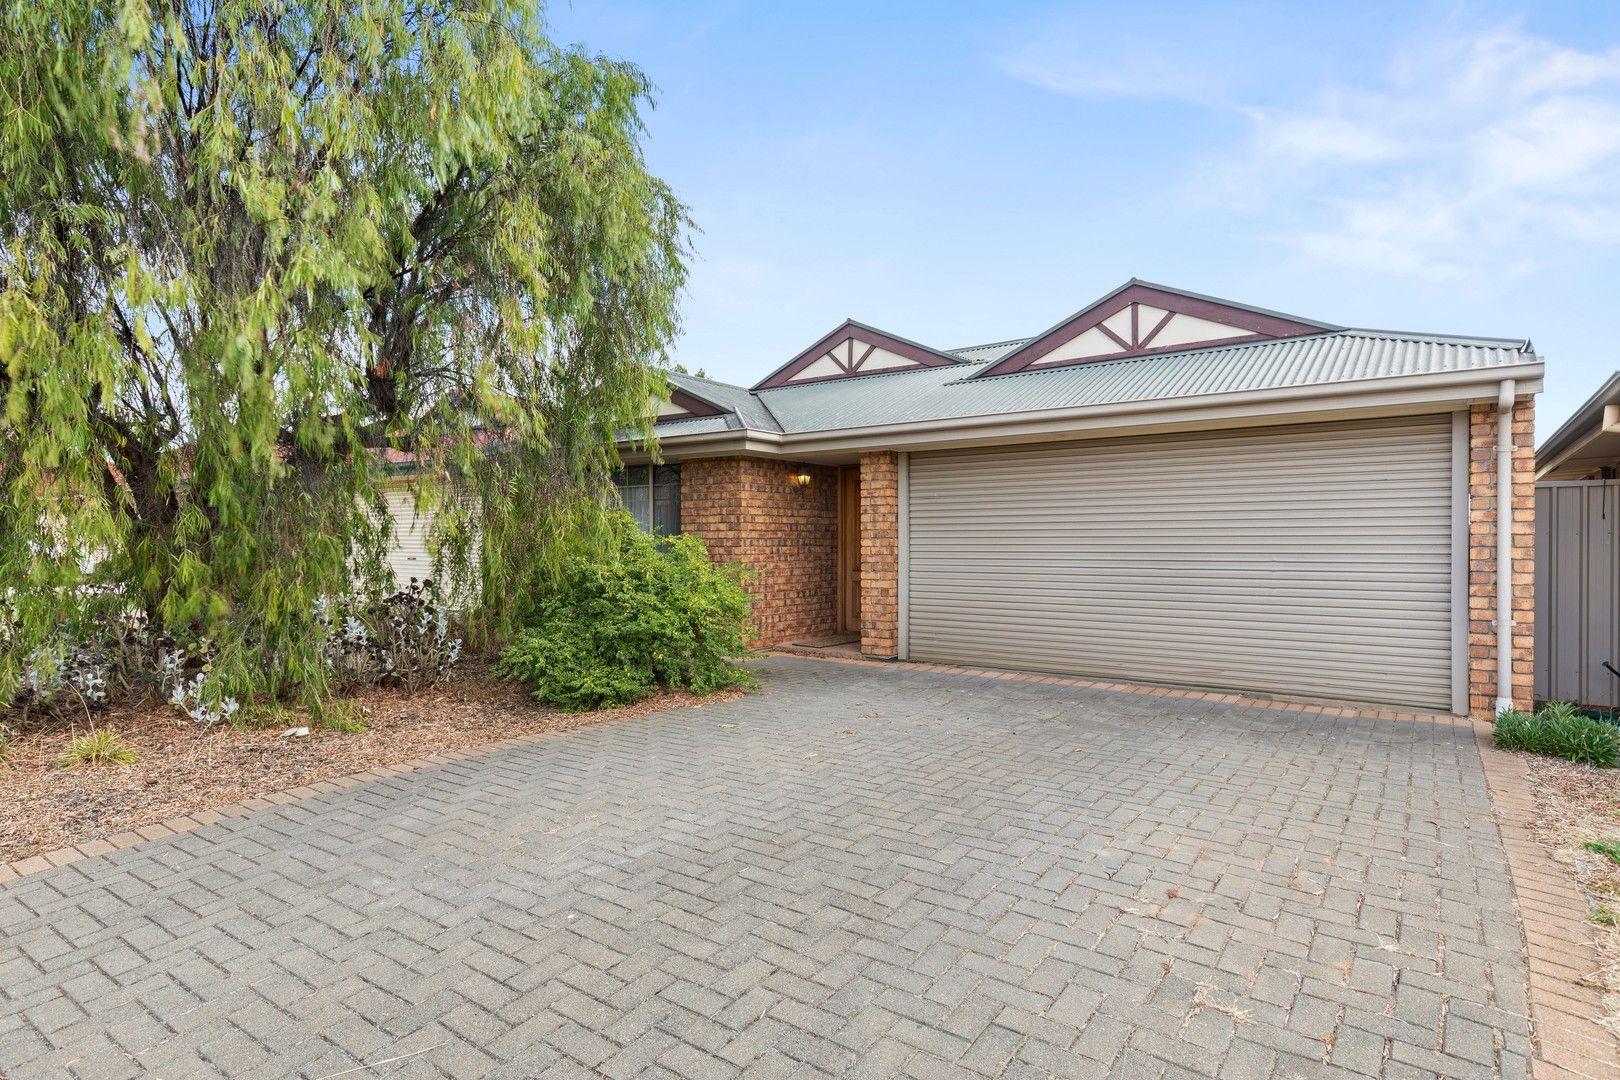 3 bedrooms House in 3 Joanna Court MITCHELL PARK SA, 5043